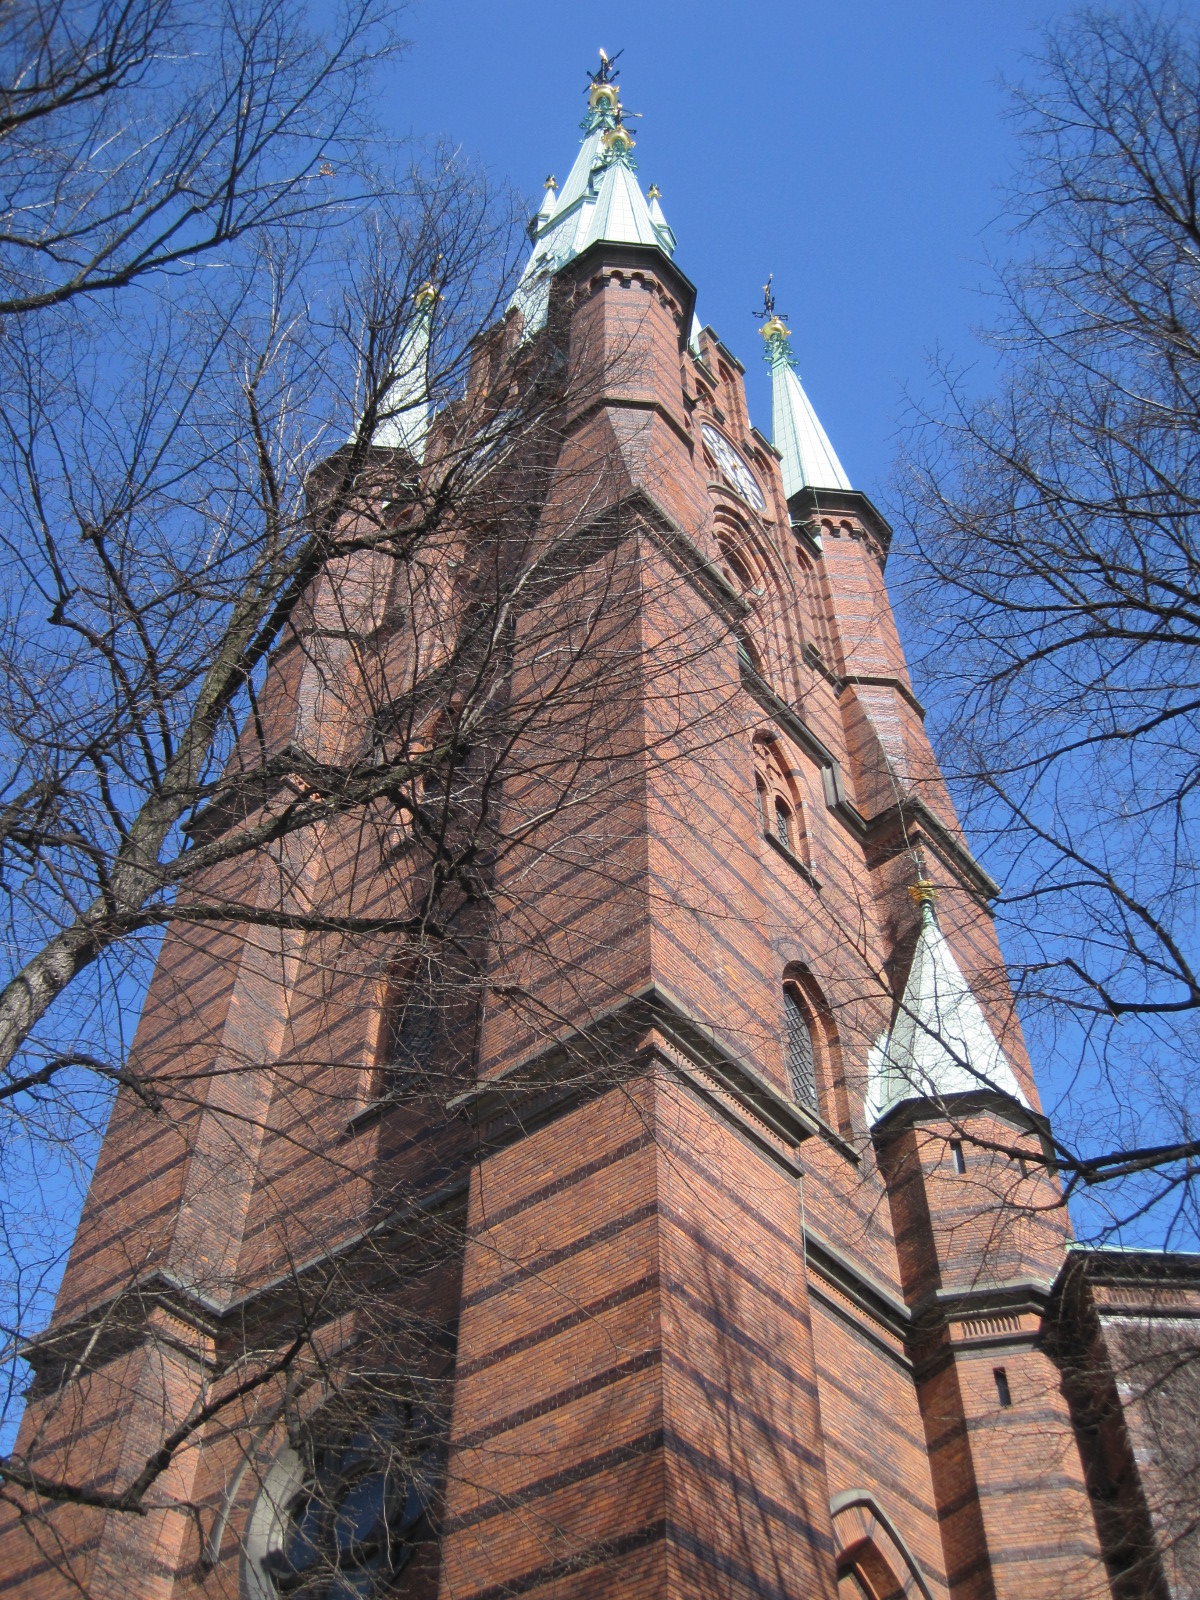 there is an old brick church tower that has steeple